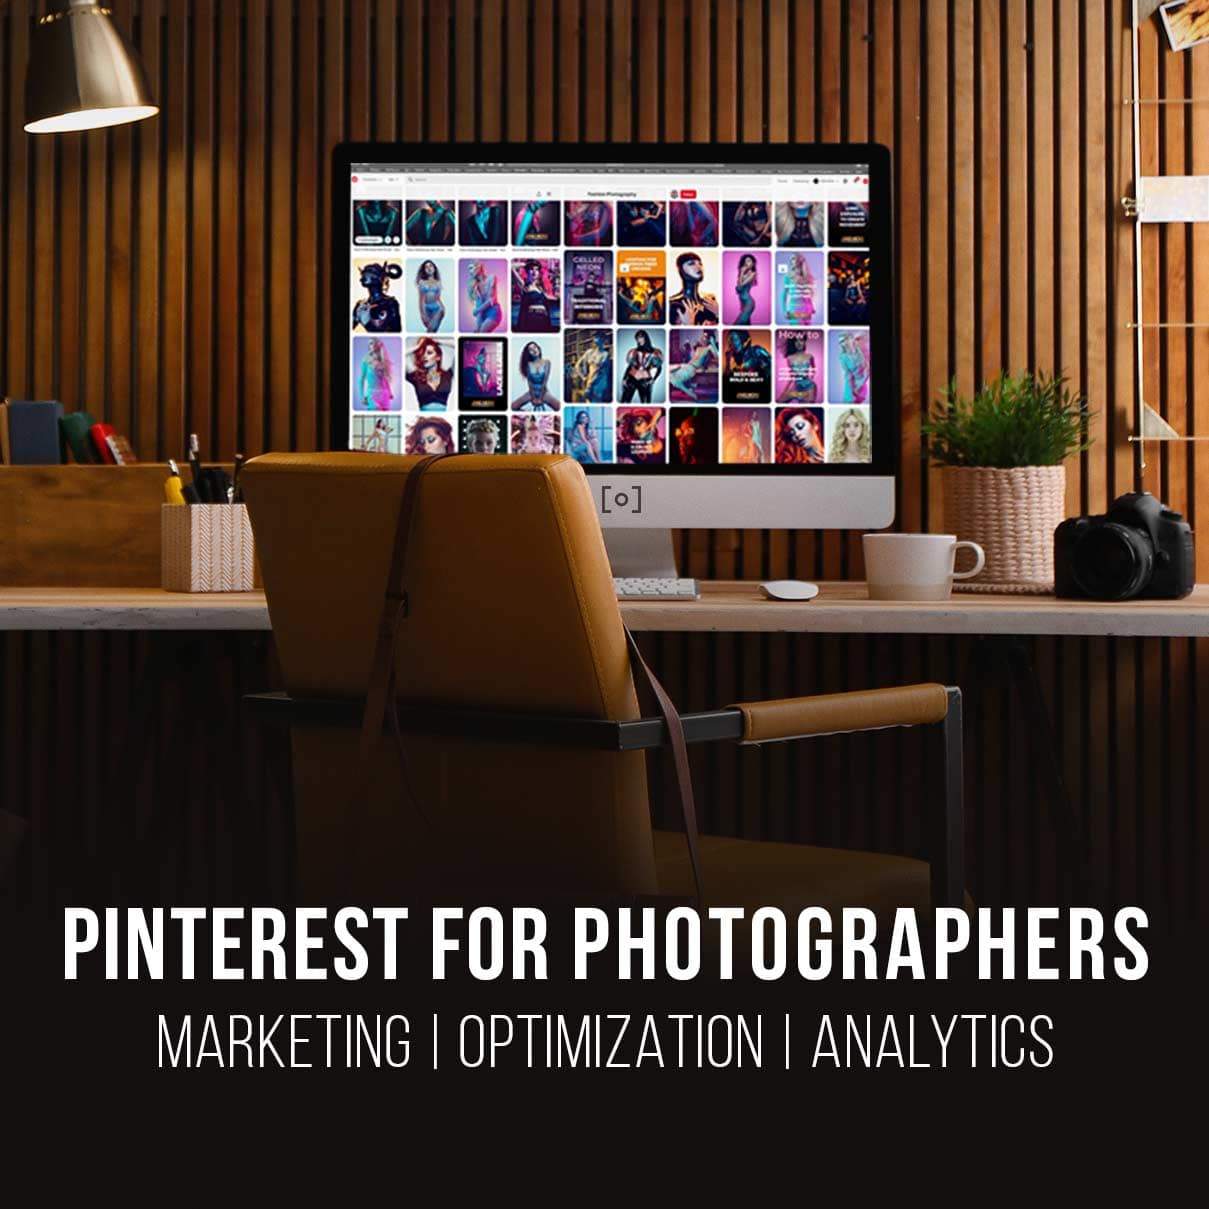 Marketing With Pinterest for Photographers with Jared Bauman - PRO EDU Jared Bauman PRO EDU